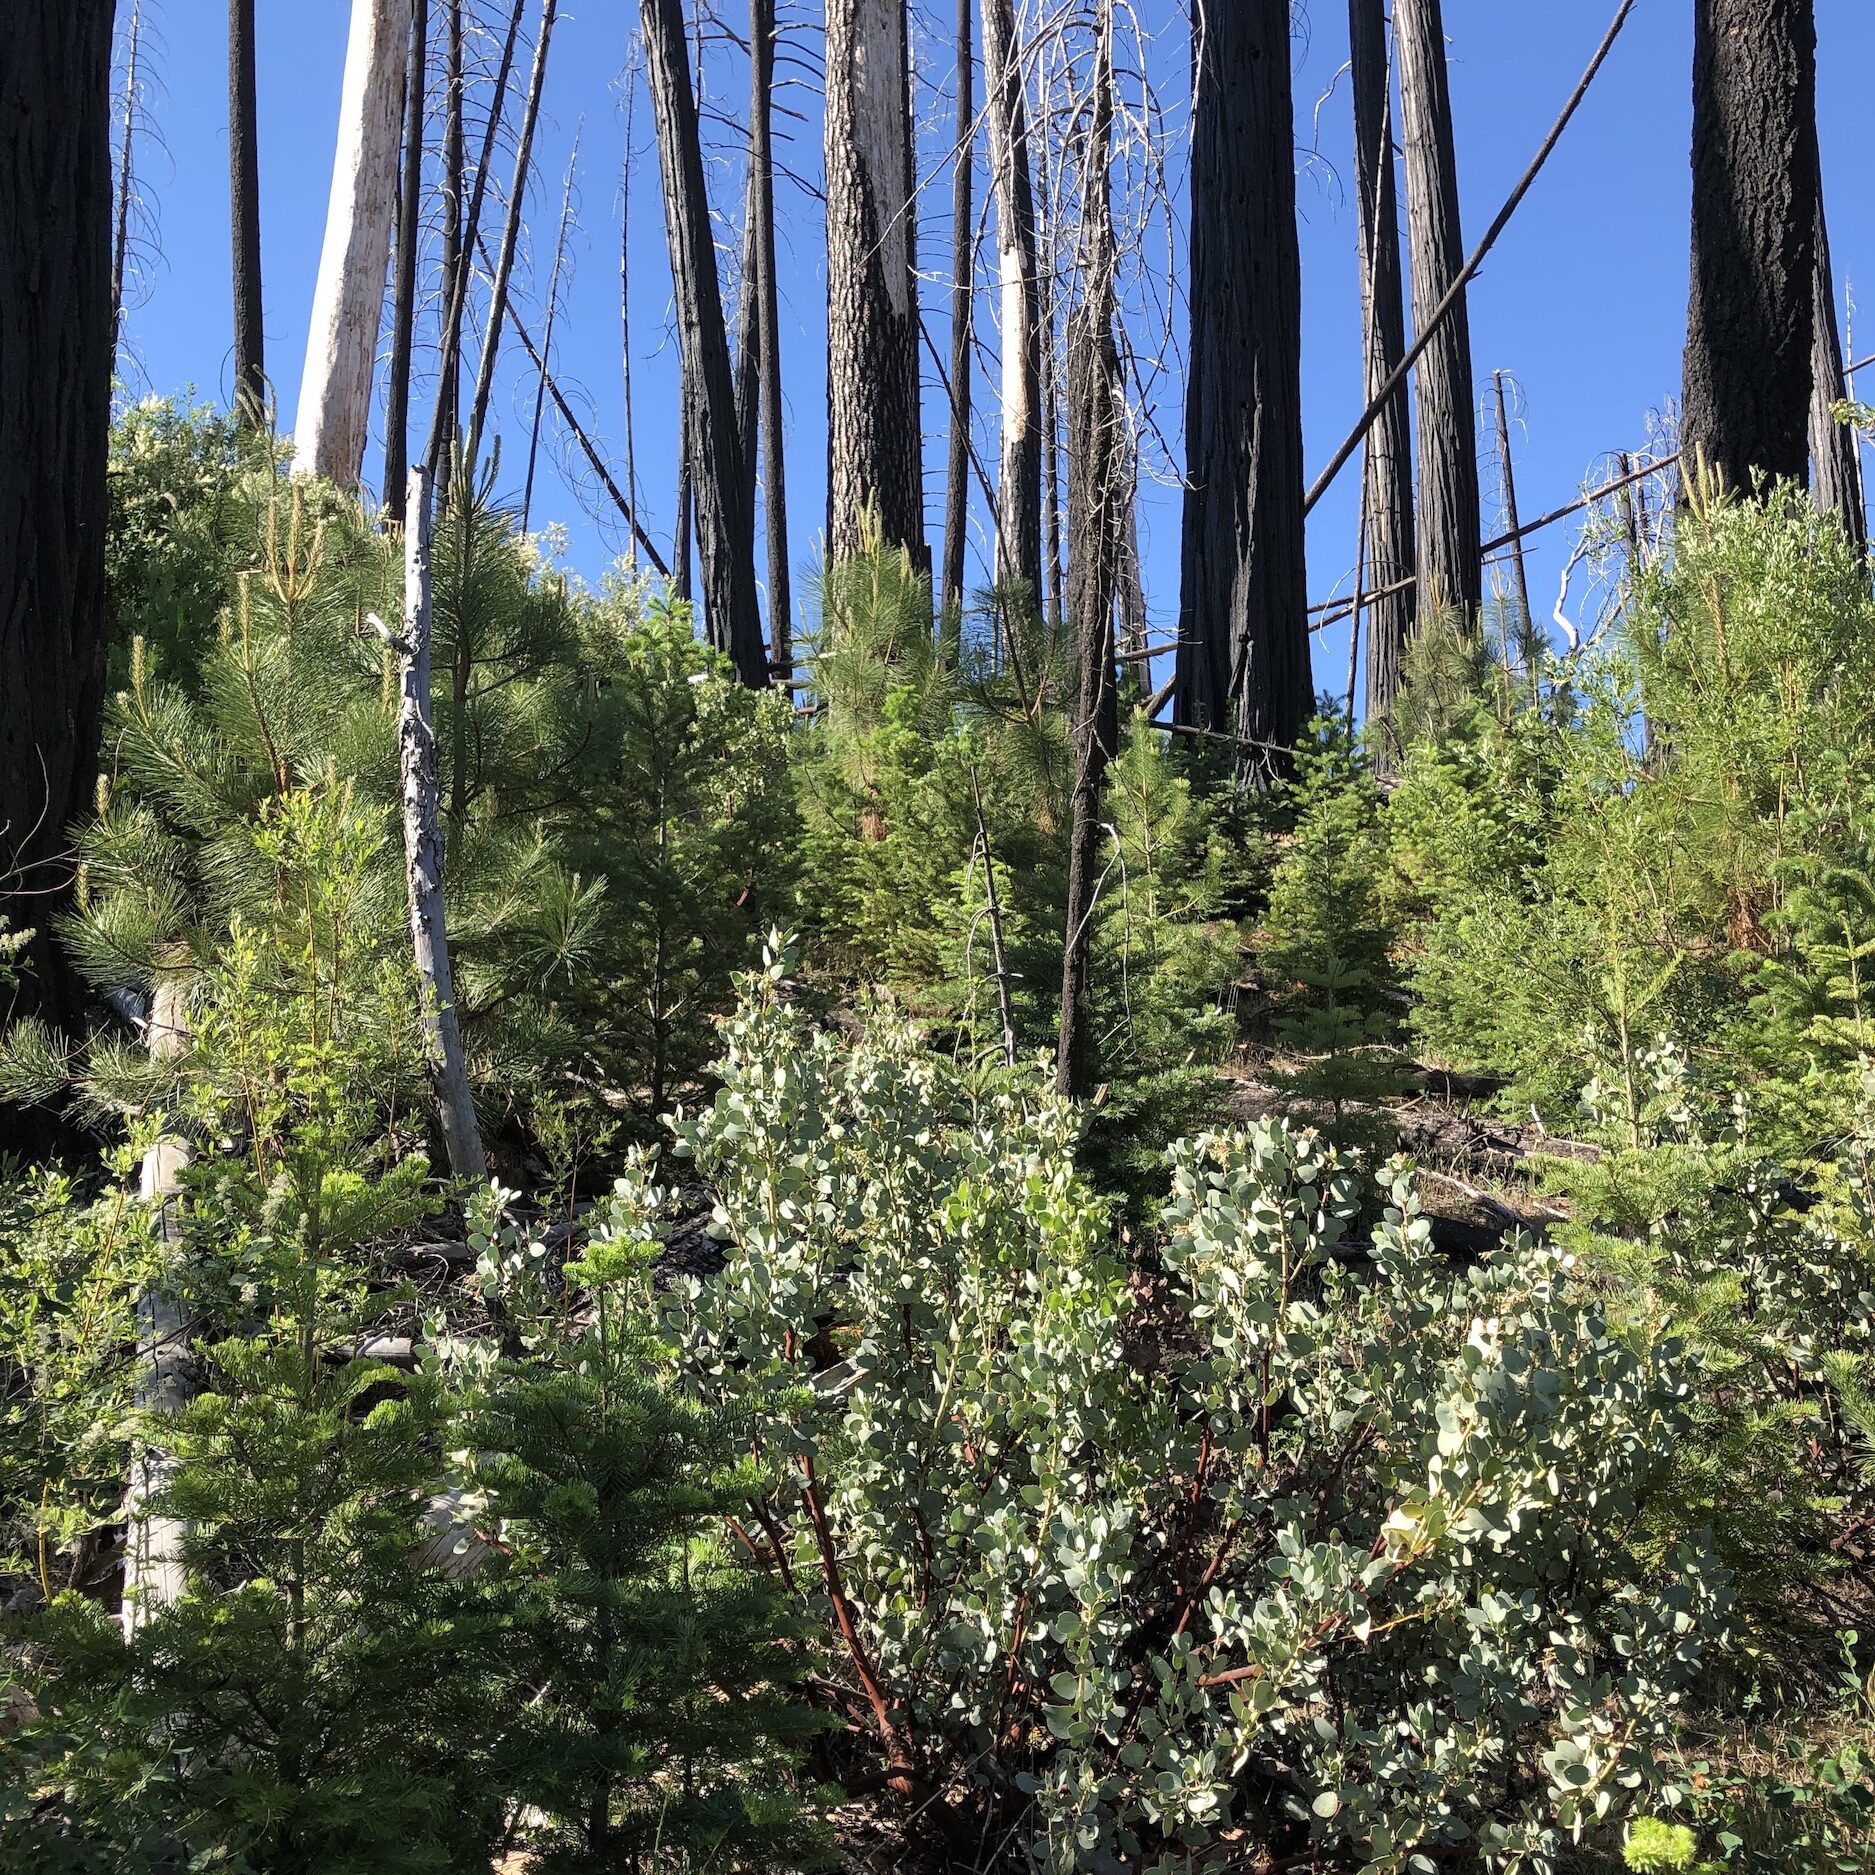 Abundant natural conifer regeneration in the middle of a large high-intensity fire patch in the Rim fire, within a spotted owl territory.